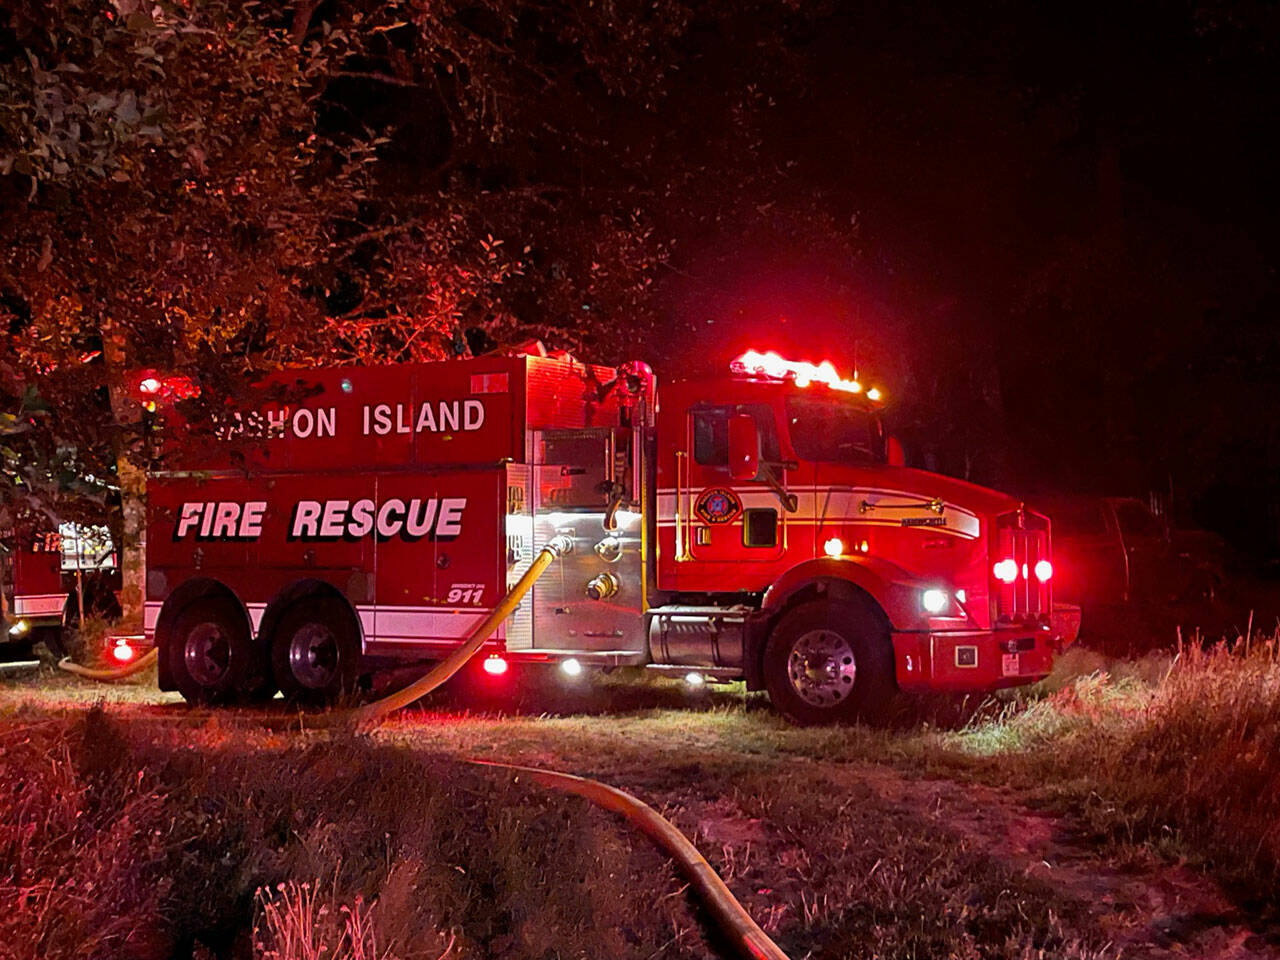 VIFR fought the fire with water from tenders, as well as a foam application on hay in the barn, with firefighters working late into the morning to ensure the blaze was completely out. (Photo courtesy Vashon Island Fire & Rescue)